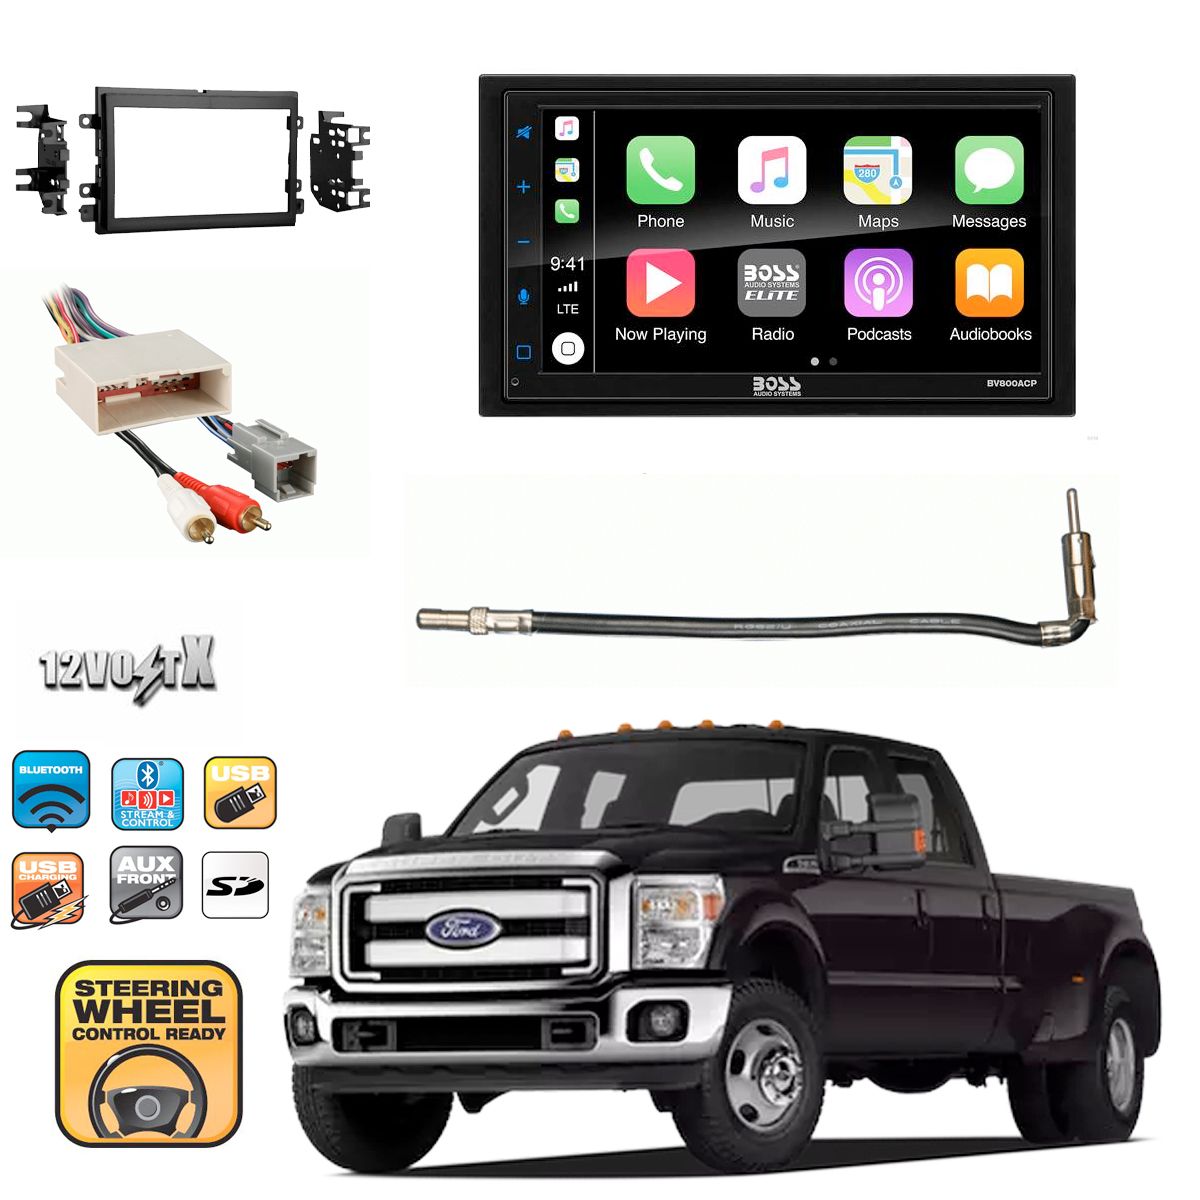 Touchsreen Cd/Dvd w/ CarPlay, Android Auto, USB, BT, for Ford F350 2005-2012